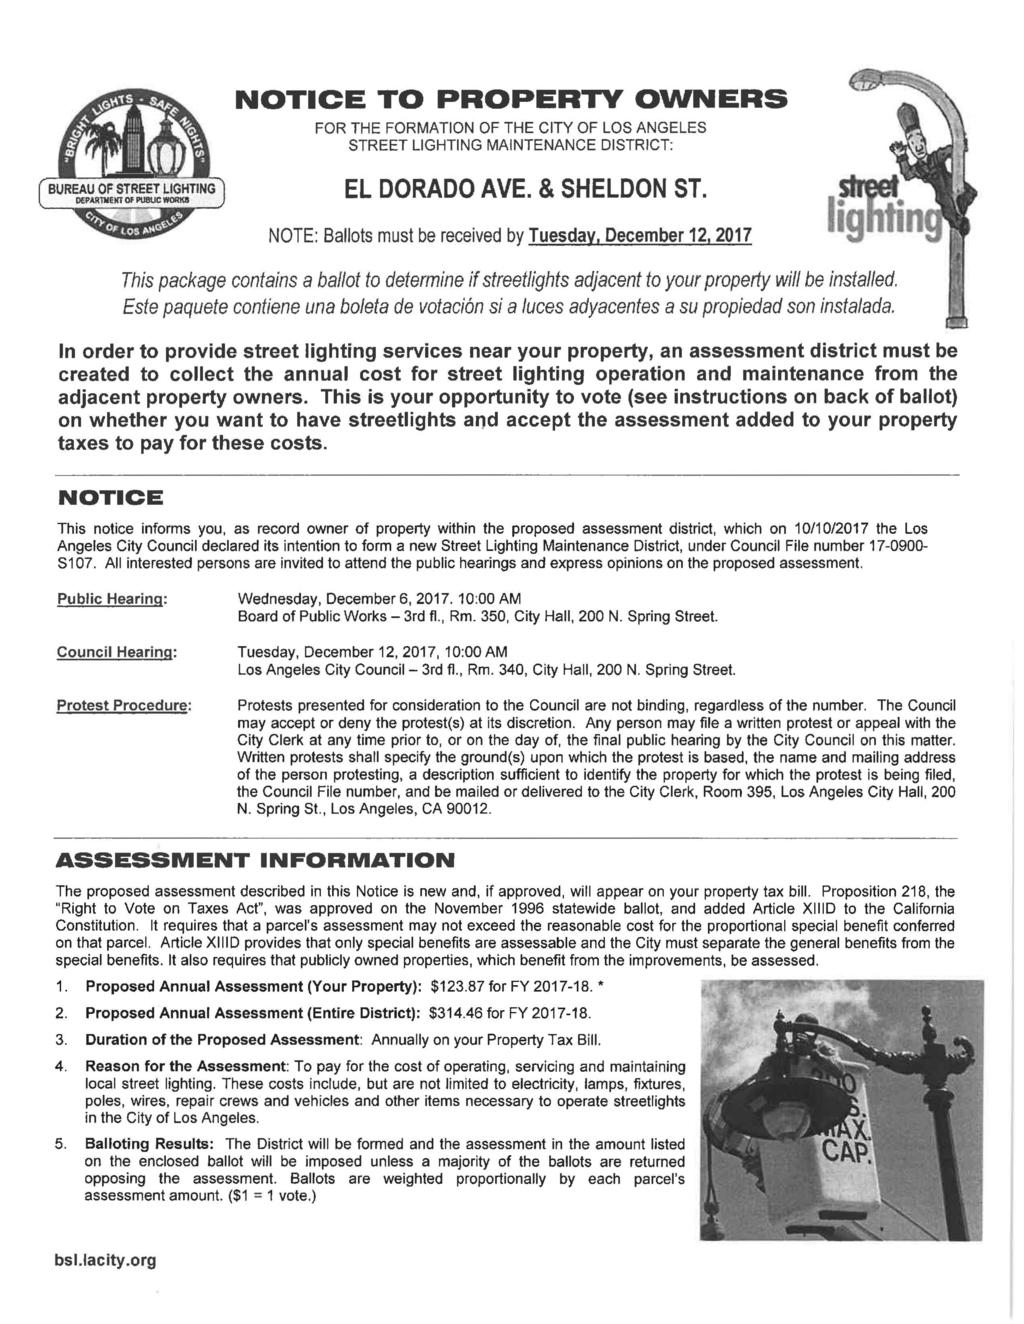 NOTICE TO PROPERTY OWNERS O FOR THE FORMATION OF THE CITY OF LOS ANGELES STREET LIGHTING MAINTENANCE DISTRICT: BUREAU OF STREET LIGHTING DEMRTHEIff Of PUBUC WORKS m i EL DORADO AVE. & SHELDON ST.